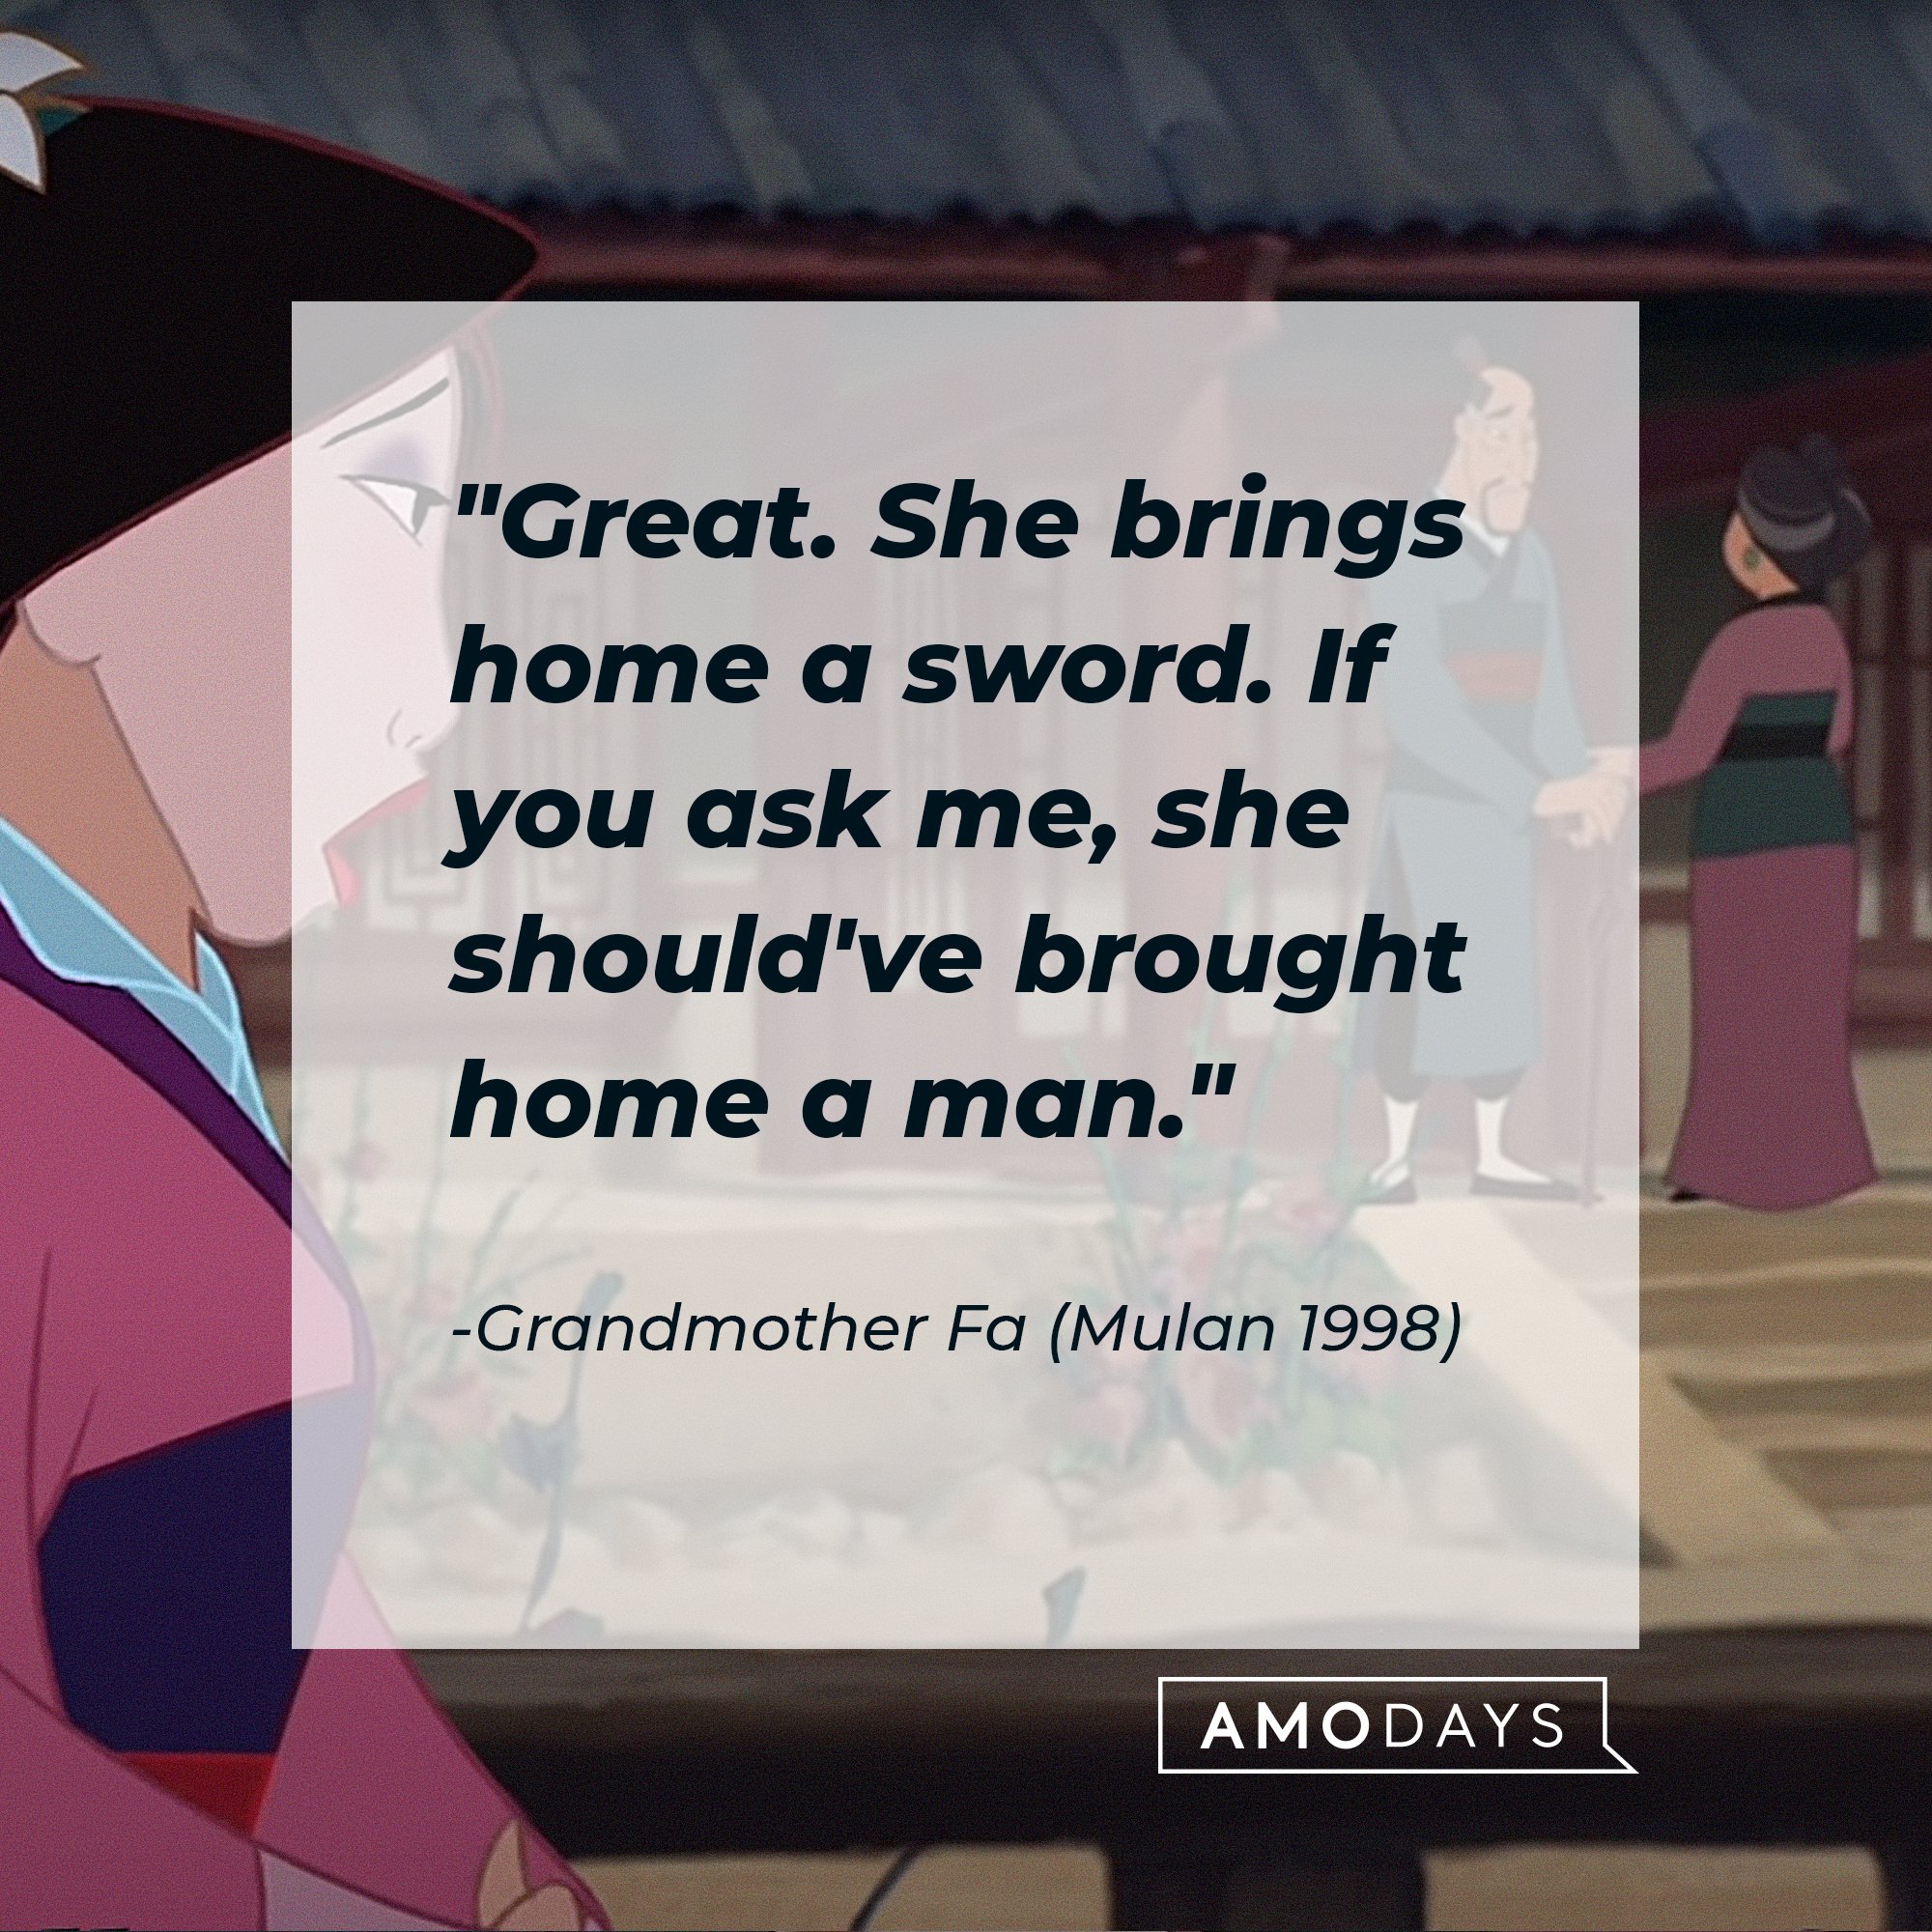 Grandmother Fa "Great. She brings home a sword. If you ask me, she should've brought home a man." | Image: AmoDays